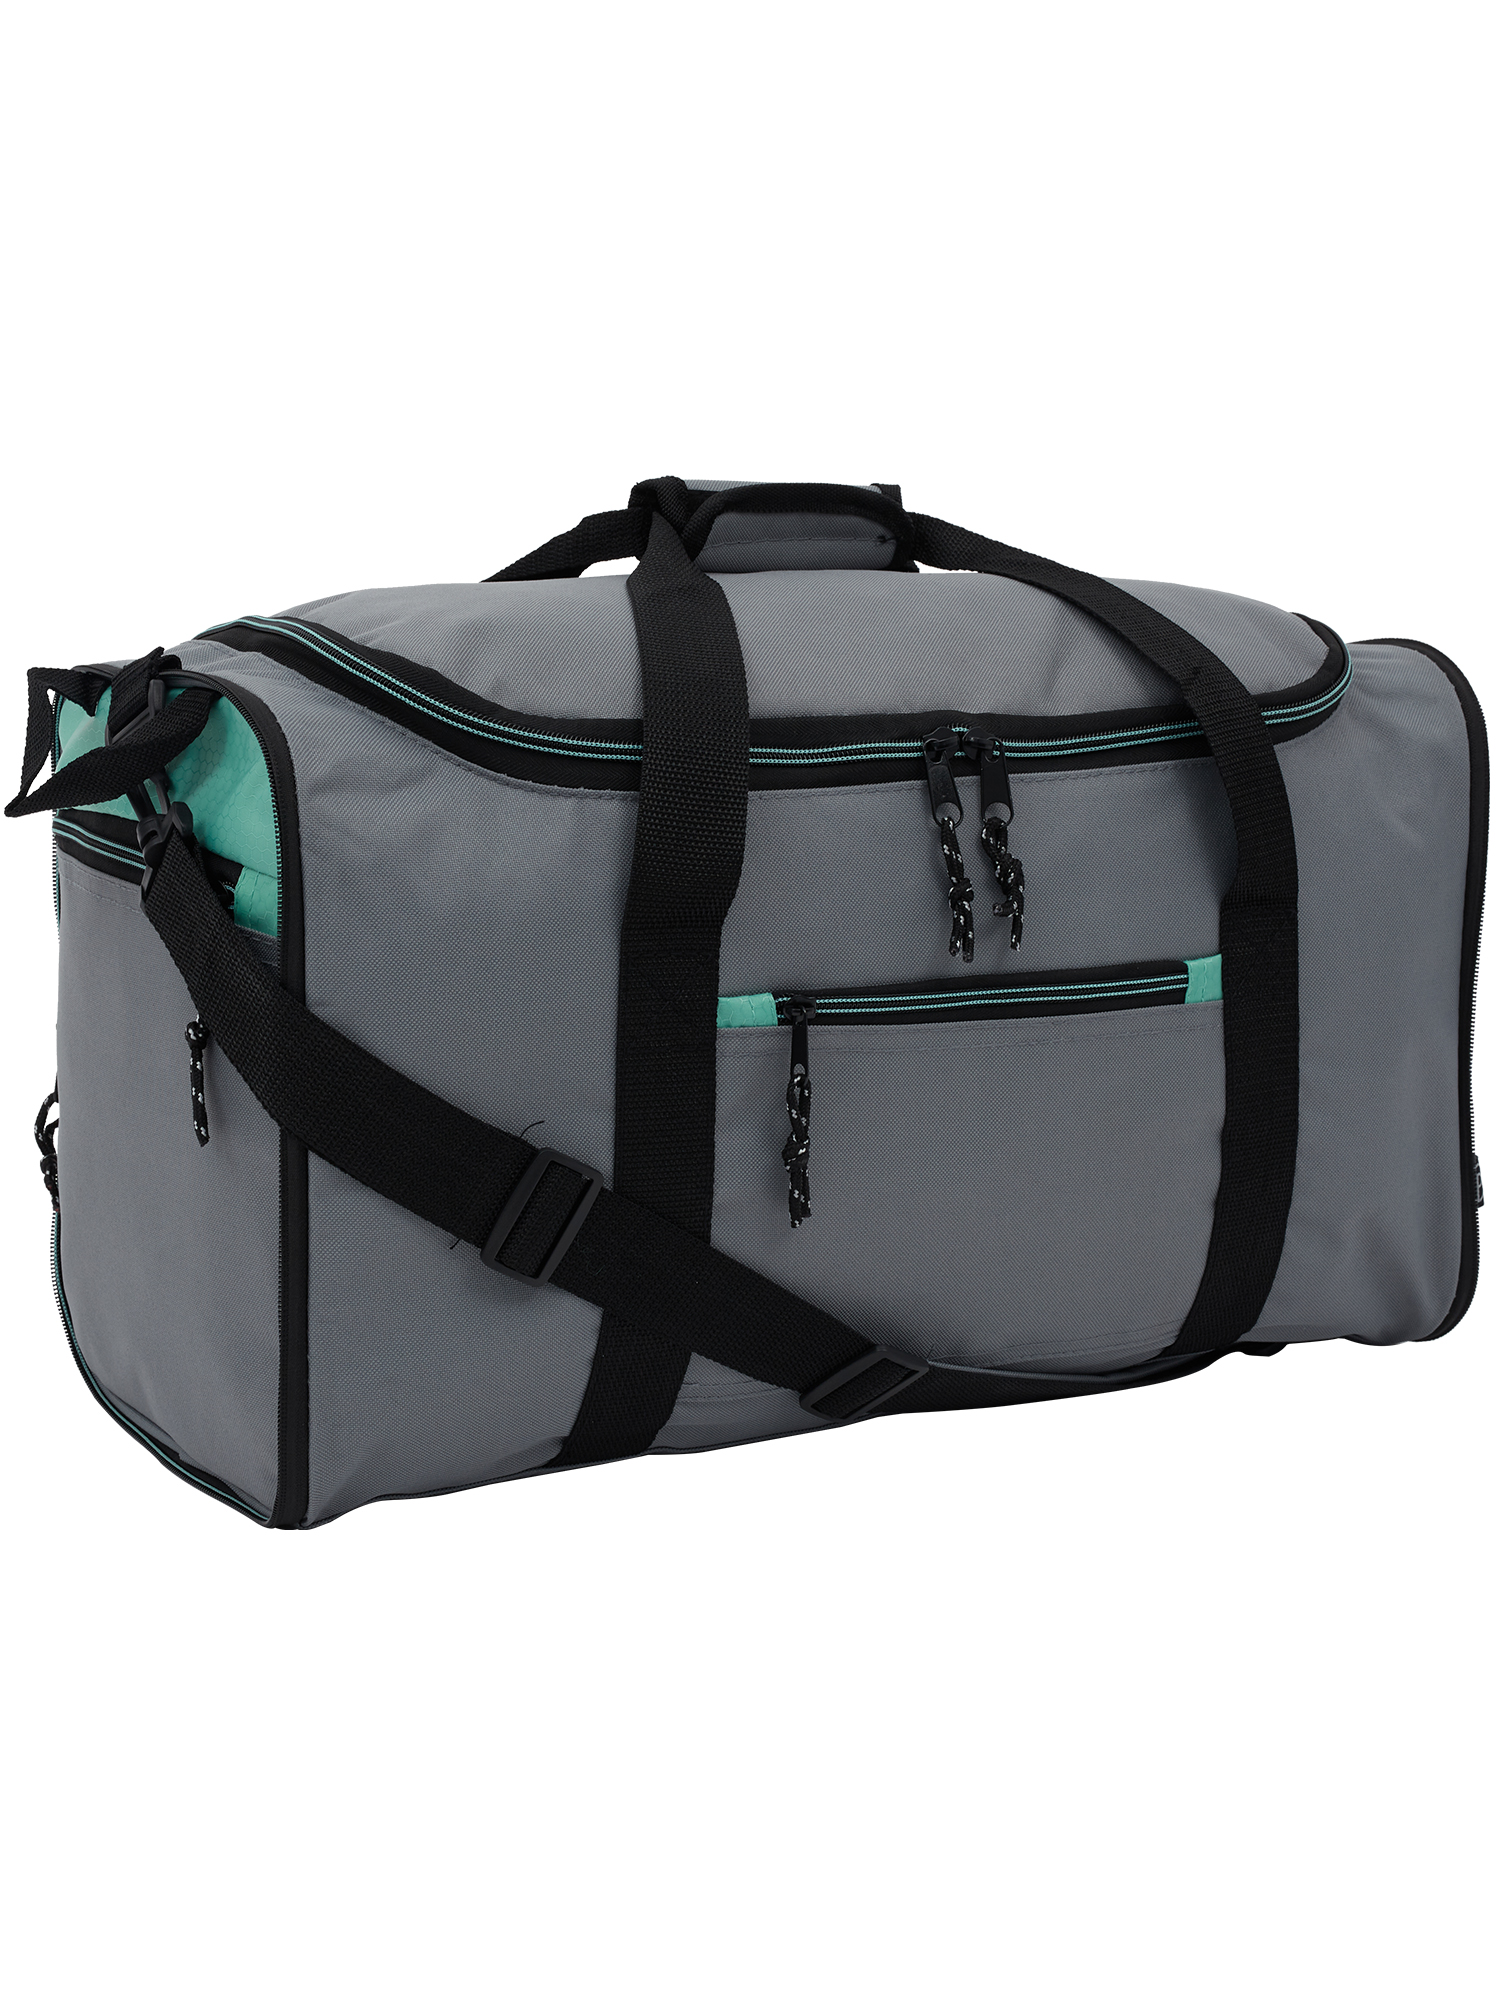 Protégé 20" Collapsible Polyester Sport and Travel Duffel Bag, Gray - image 2 of 9